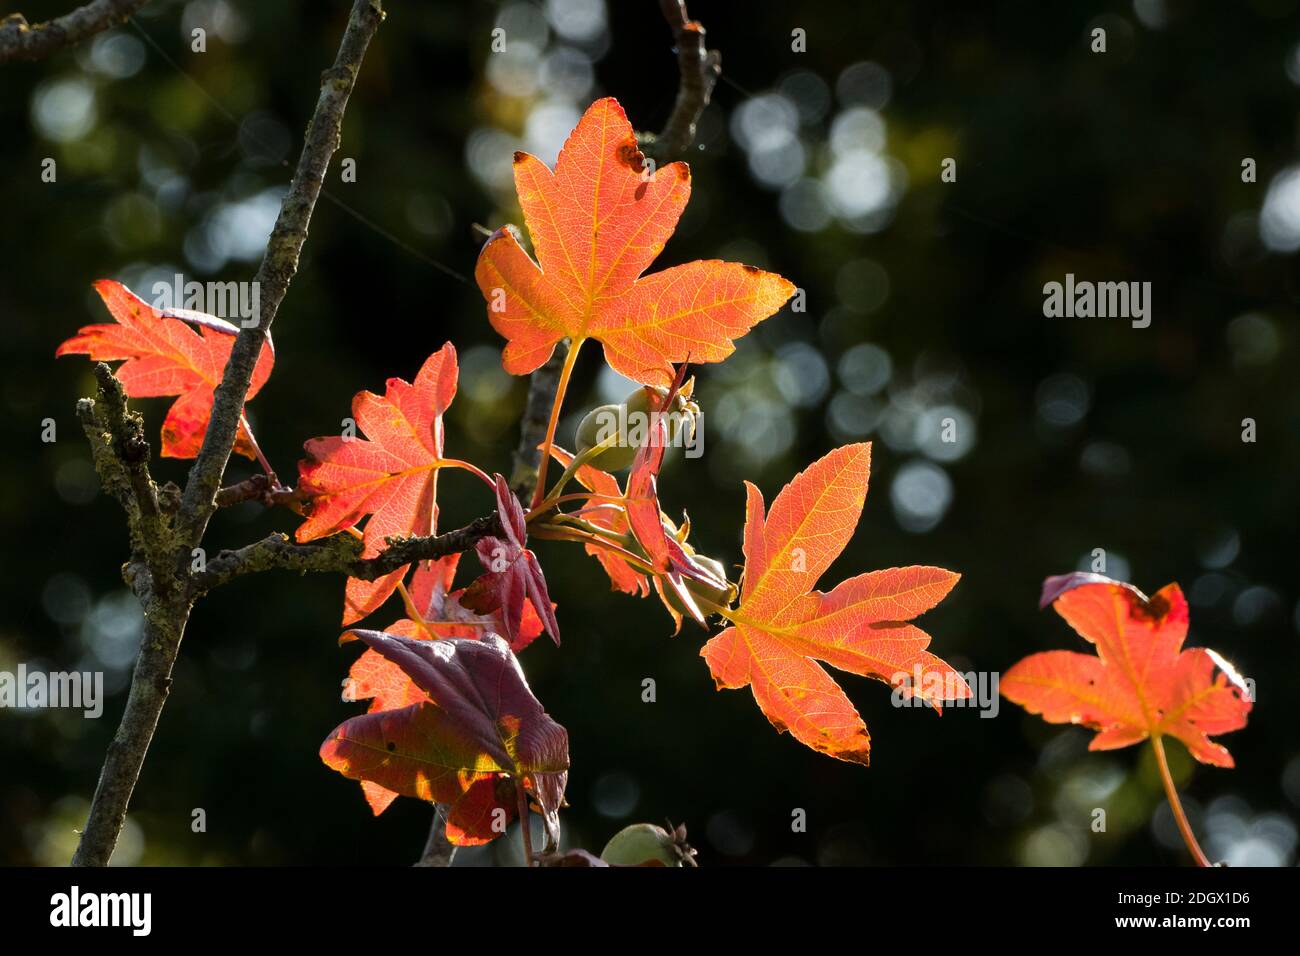 Reddish yelllow maple-shaped leaves of ornamental crab apple tree - Malus trilobata Guardsman - showing their colour and shapes in Autumn in an English garden Stock Photo